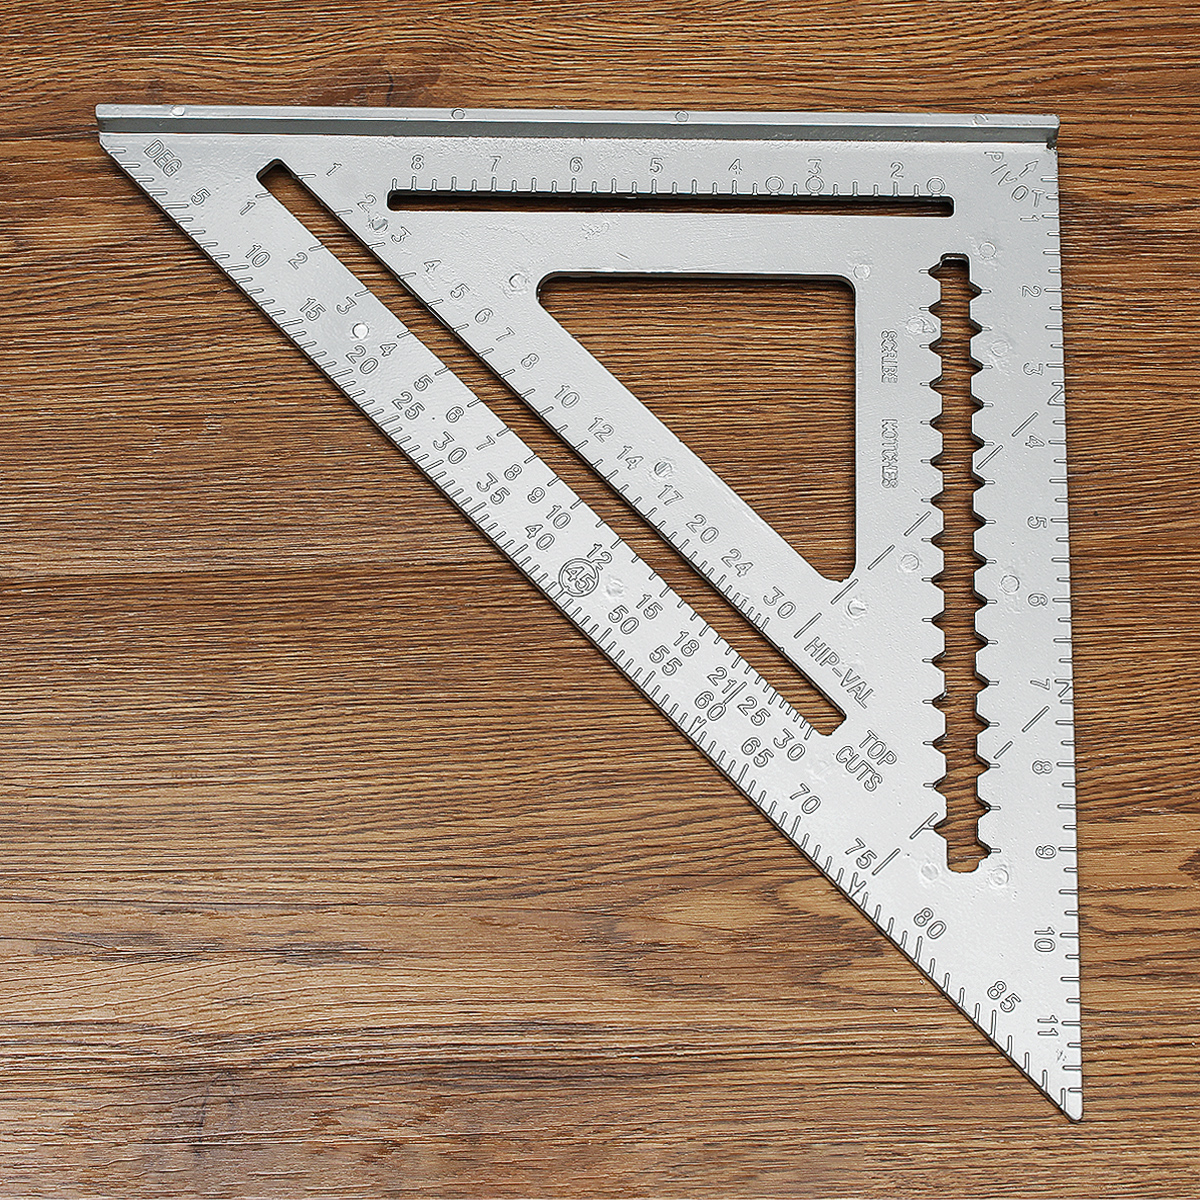 12inch-Aluminum-Alloy-Right-Angle-Triangle-Ruler-Protractor-Framing-Measuring-Tools-1597414-9